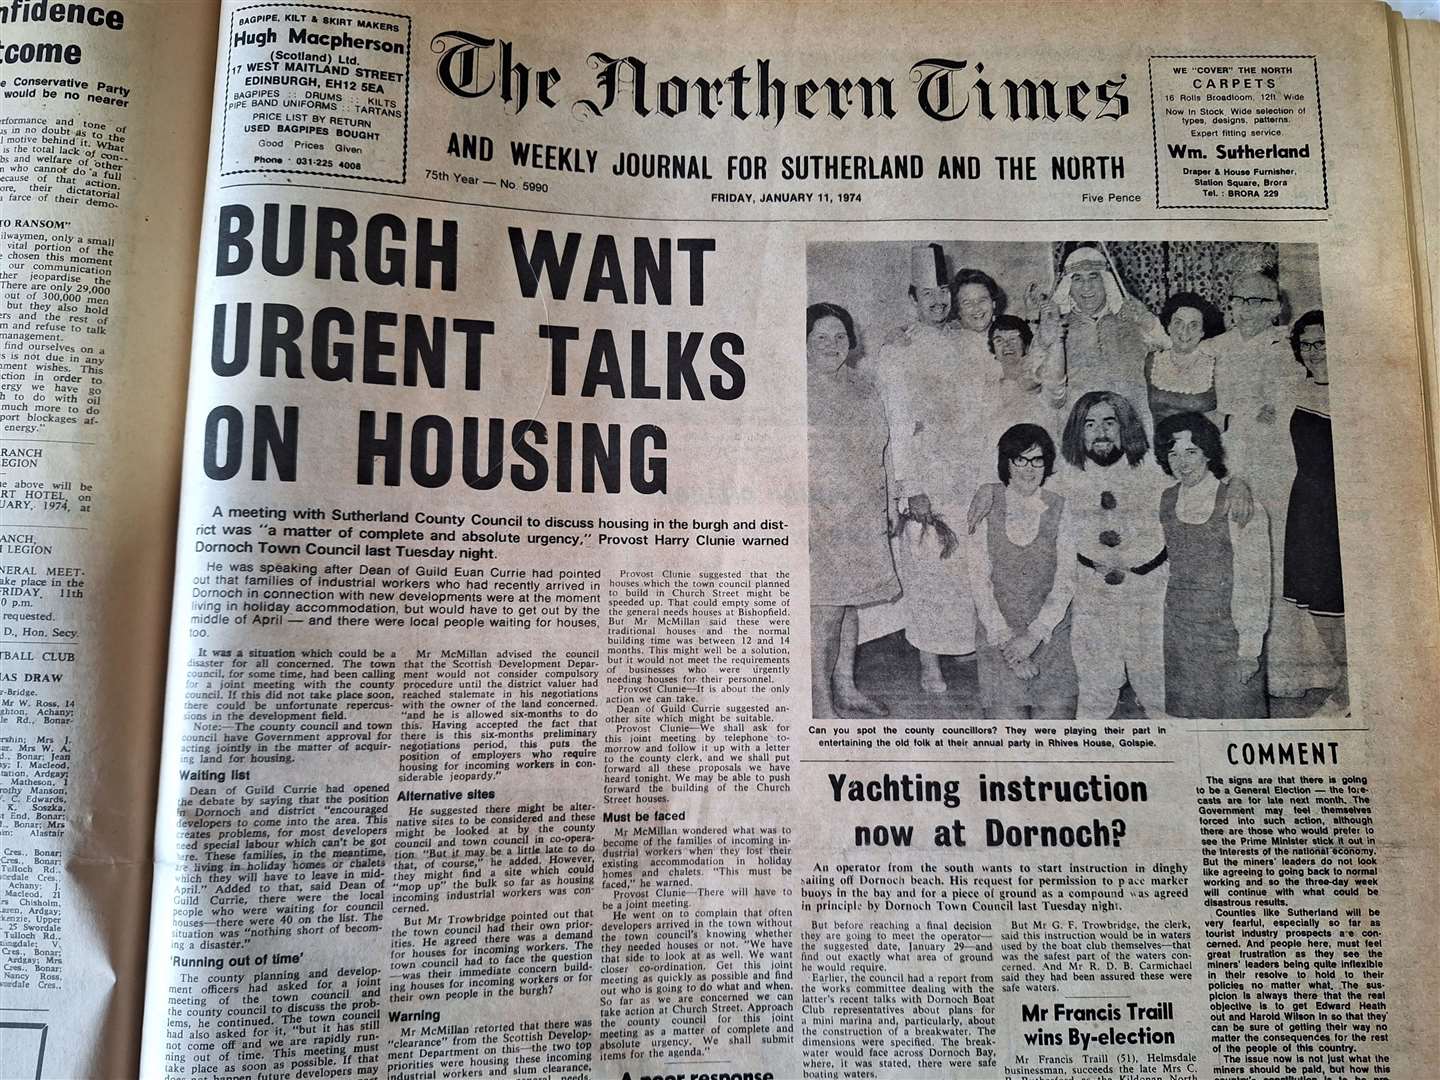 The edition of January 11, 1974.